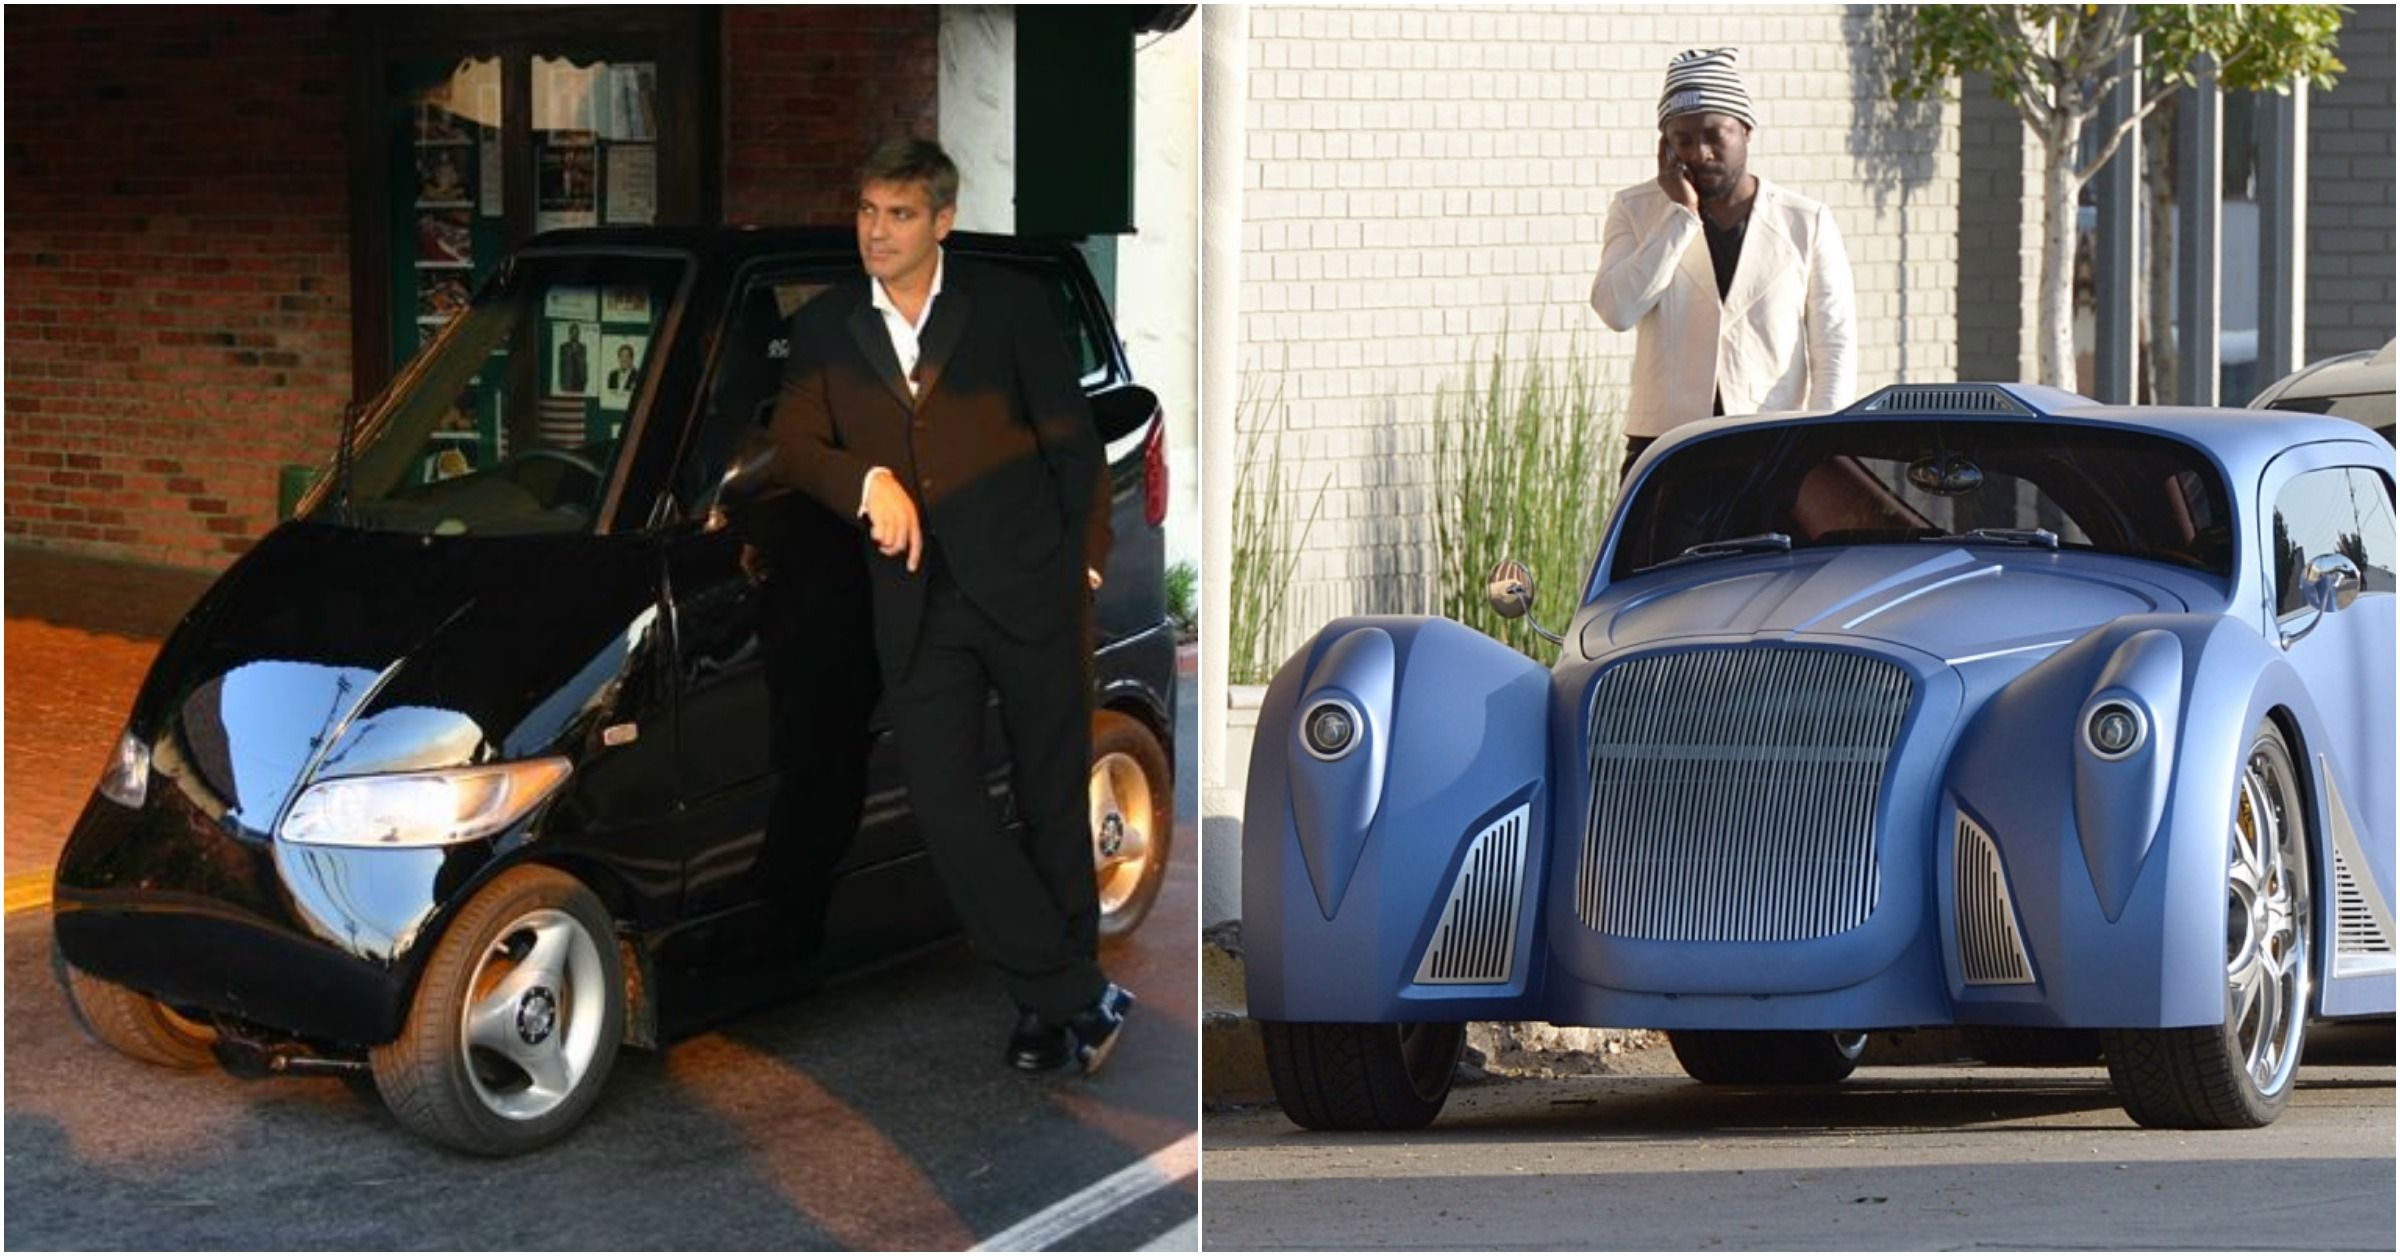 15 Celebrities Who Drive The Most Surprising Cars